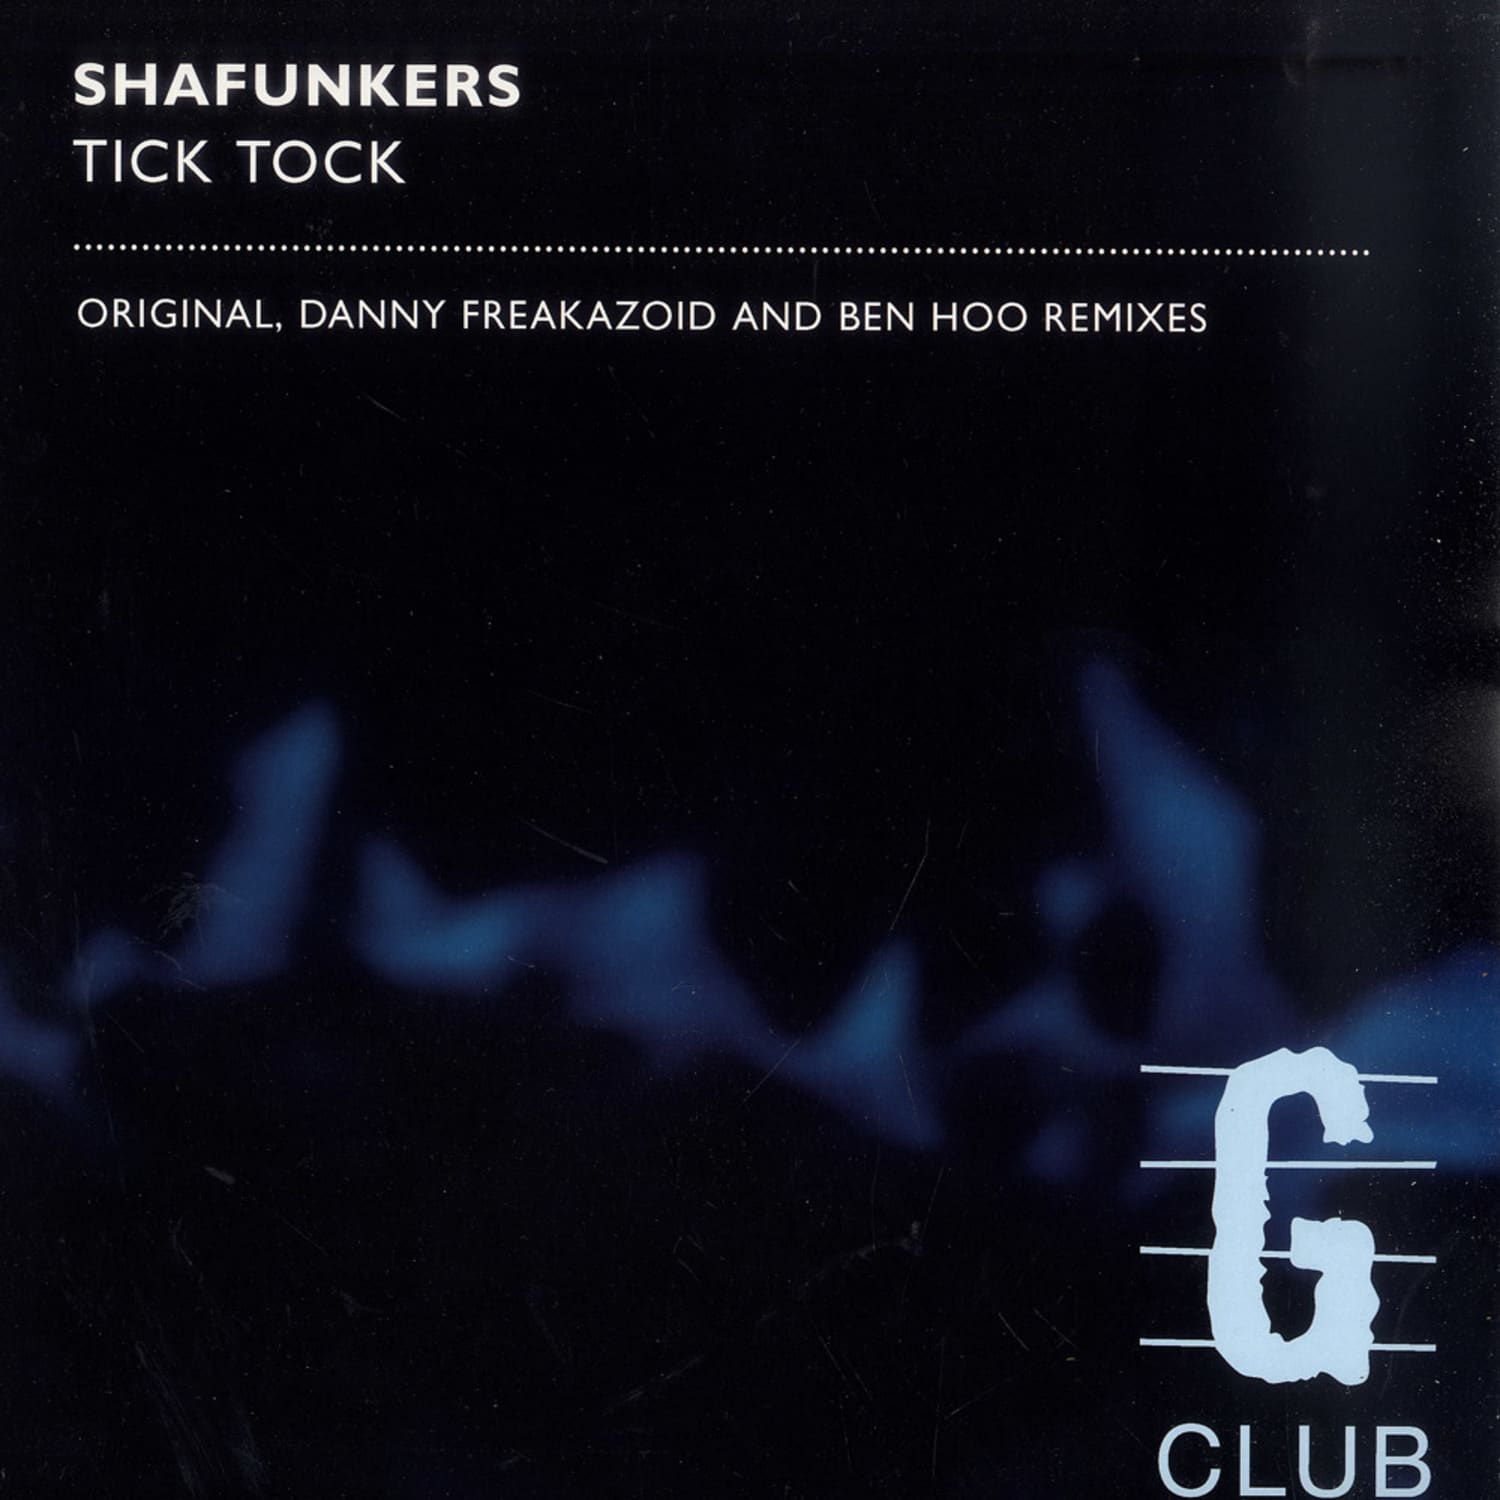 Shafunkers - TICK TOCK